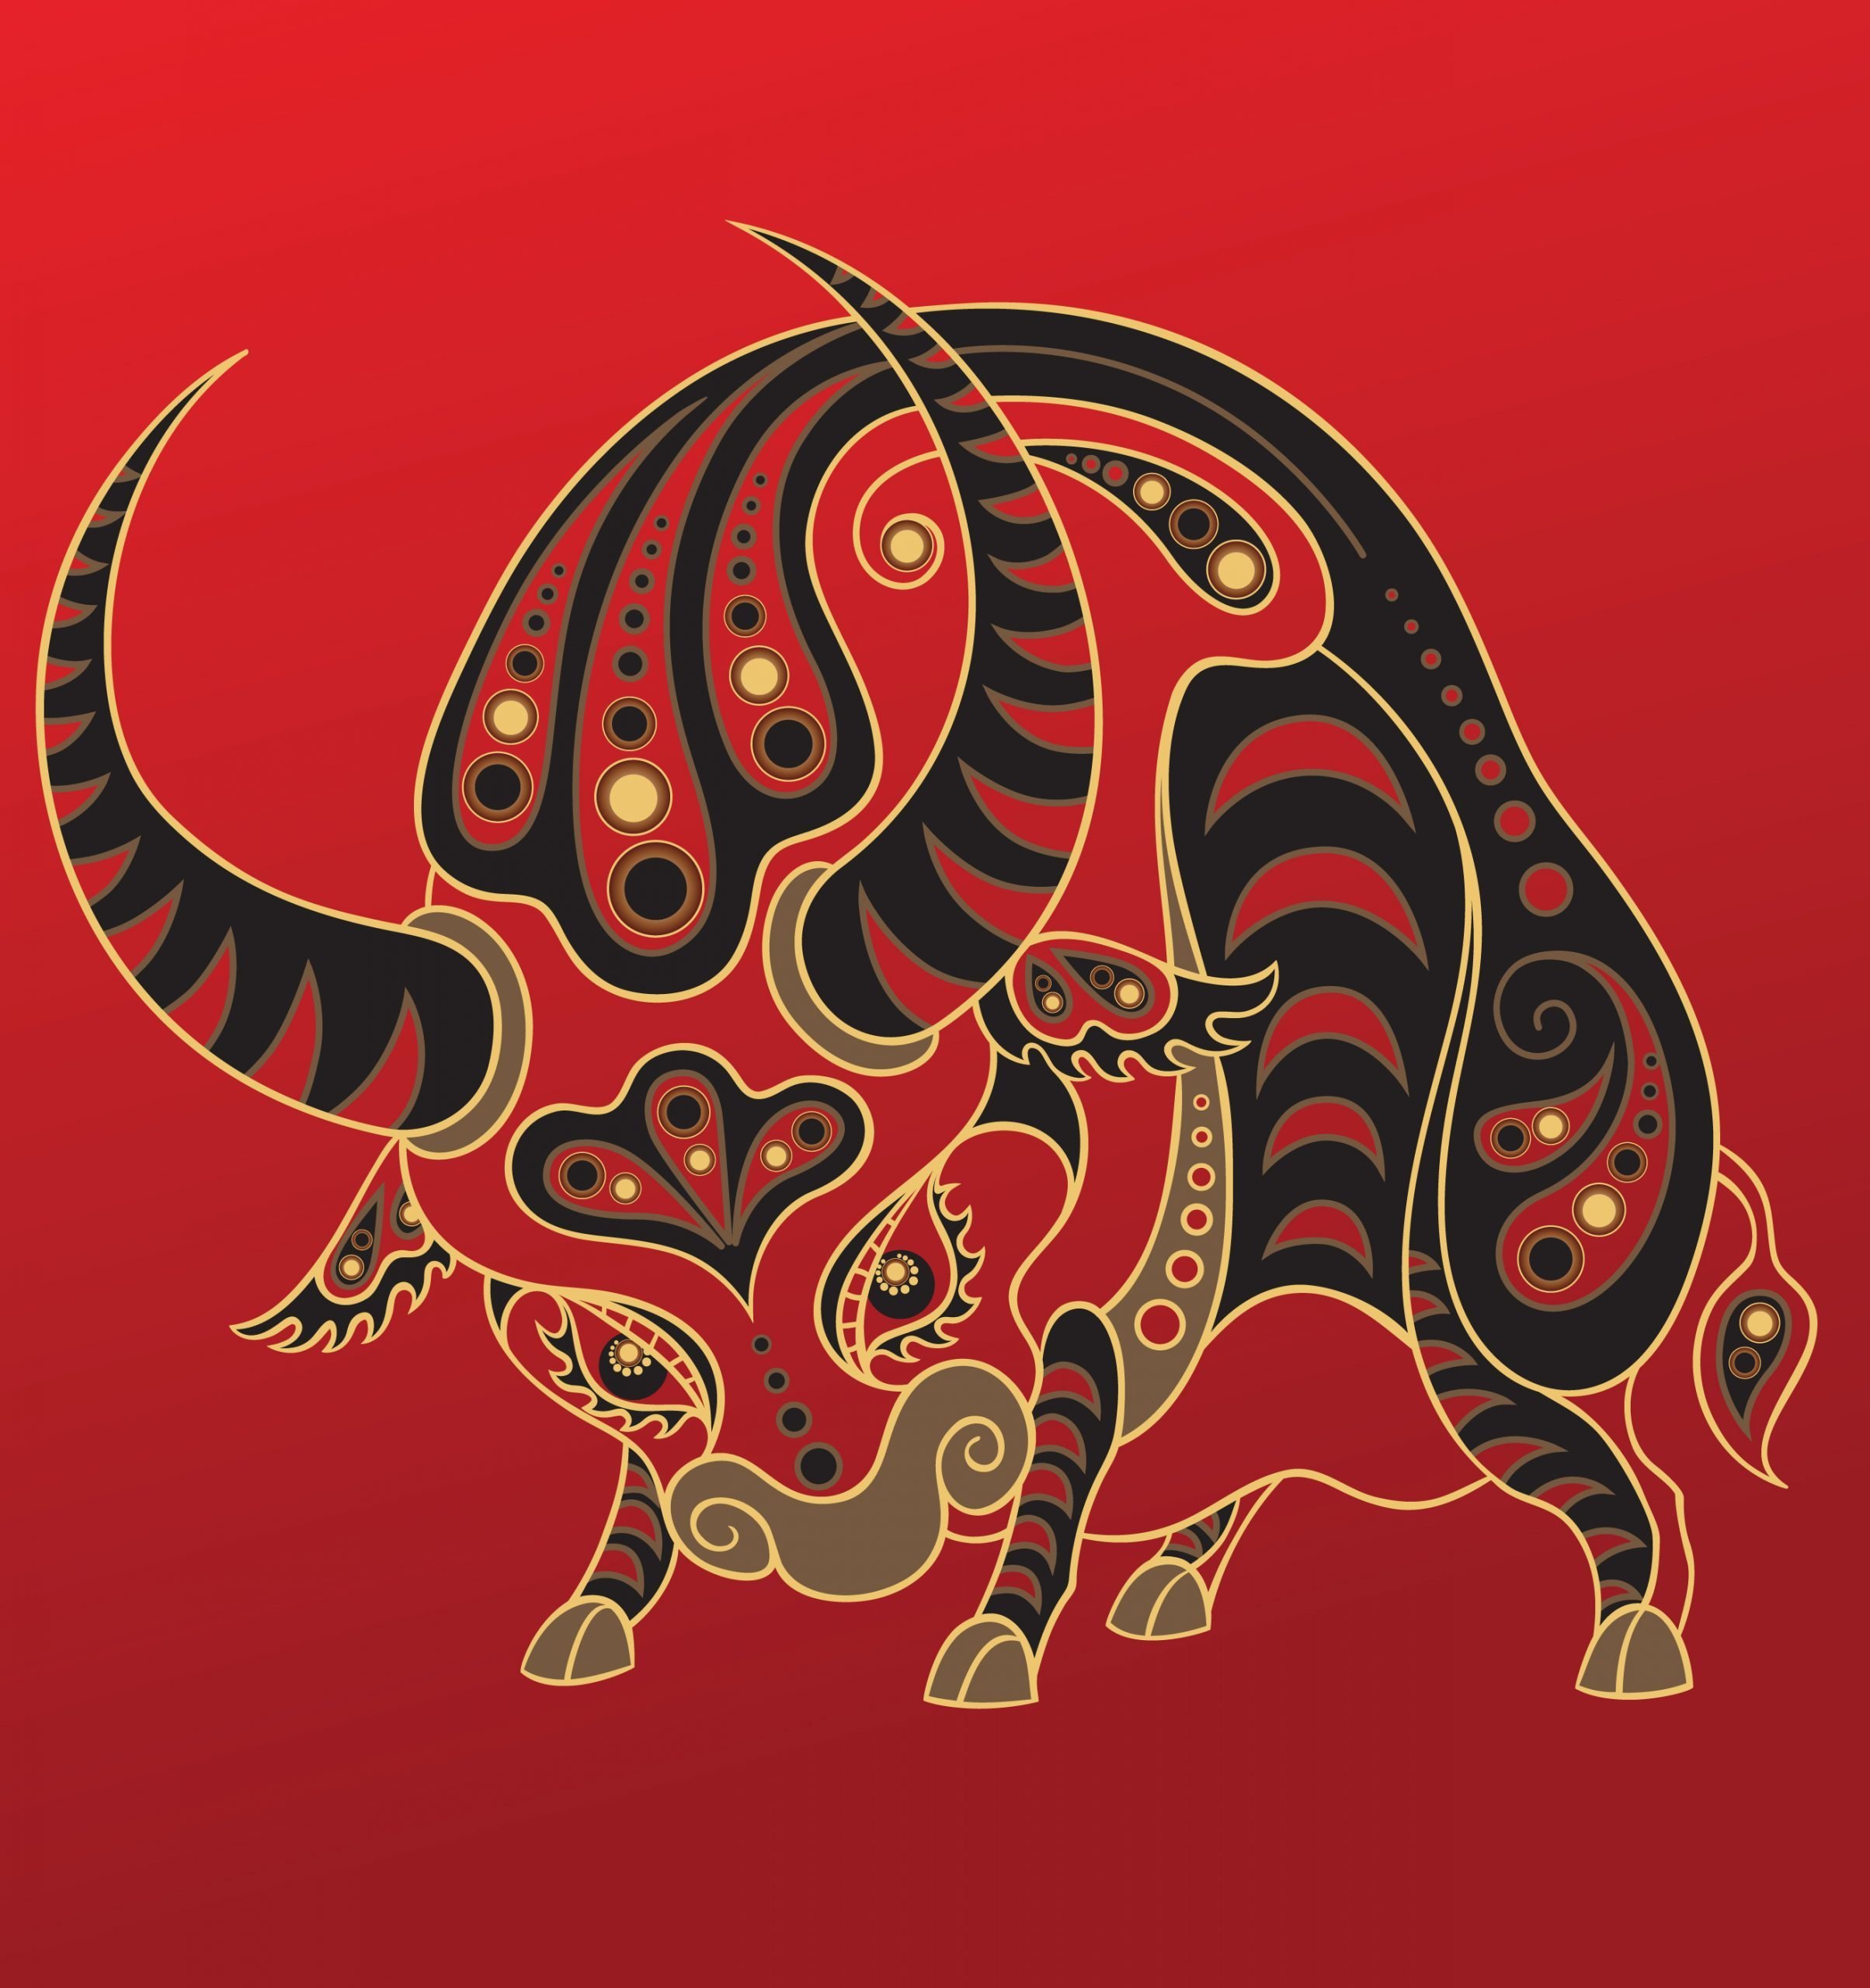 What's in Store for You Based on Your Chinese Zodiac Reader's Digest